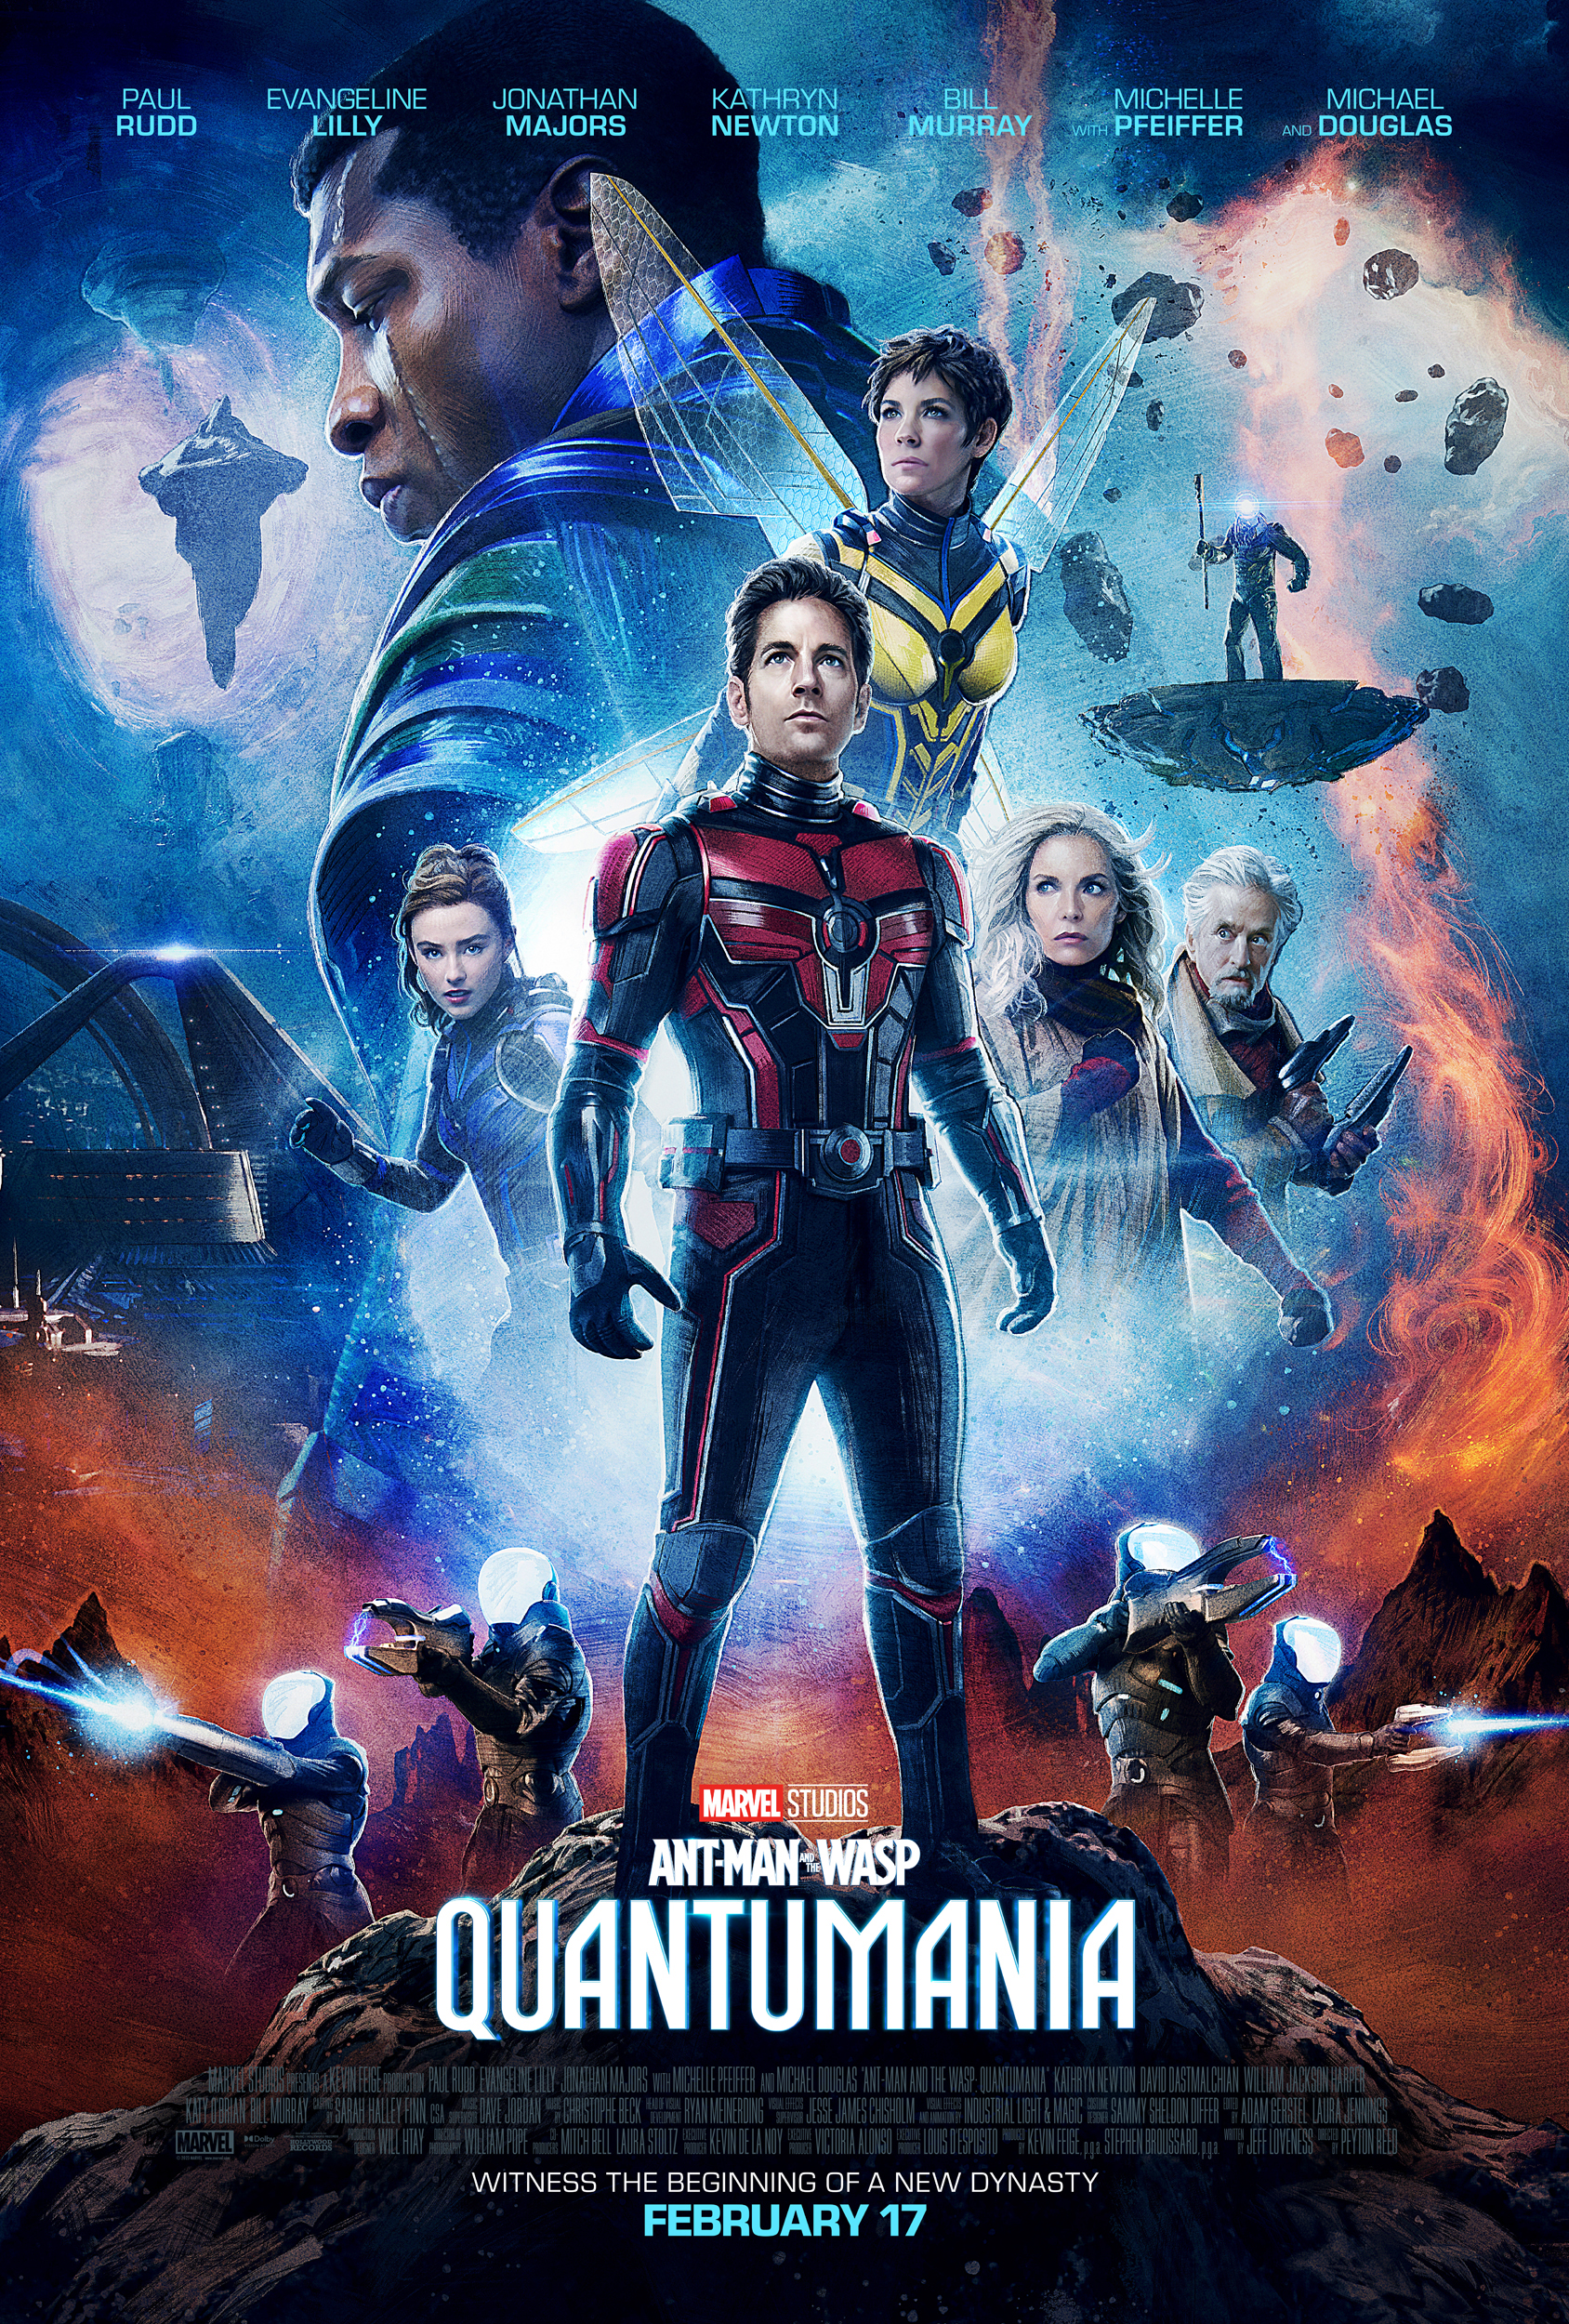 Ant-Man and the Wasp: Quantumania' MCU's Second-Lowest Rated Film